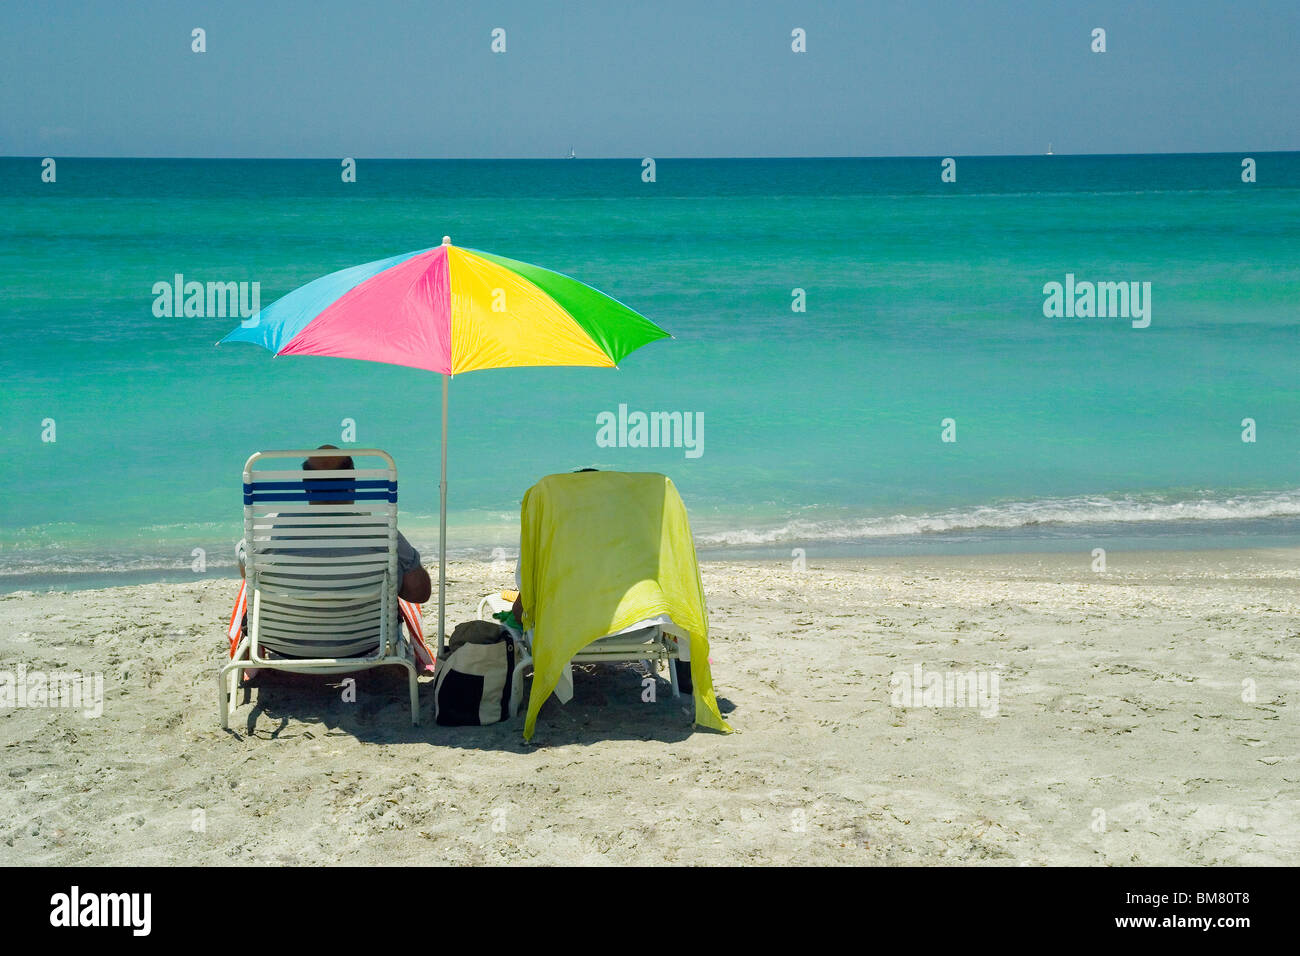 Vacationers enjoy relaxing with a peaceful view of the pristine Gulf of Mexico turquoise waters along the Longboat Key beach at Sarasota, Florida, USA. Stock Photo